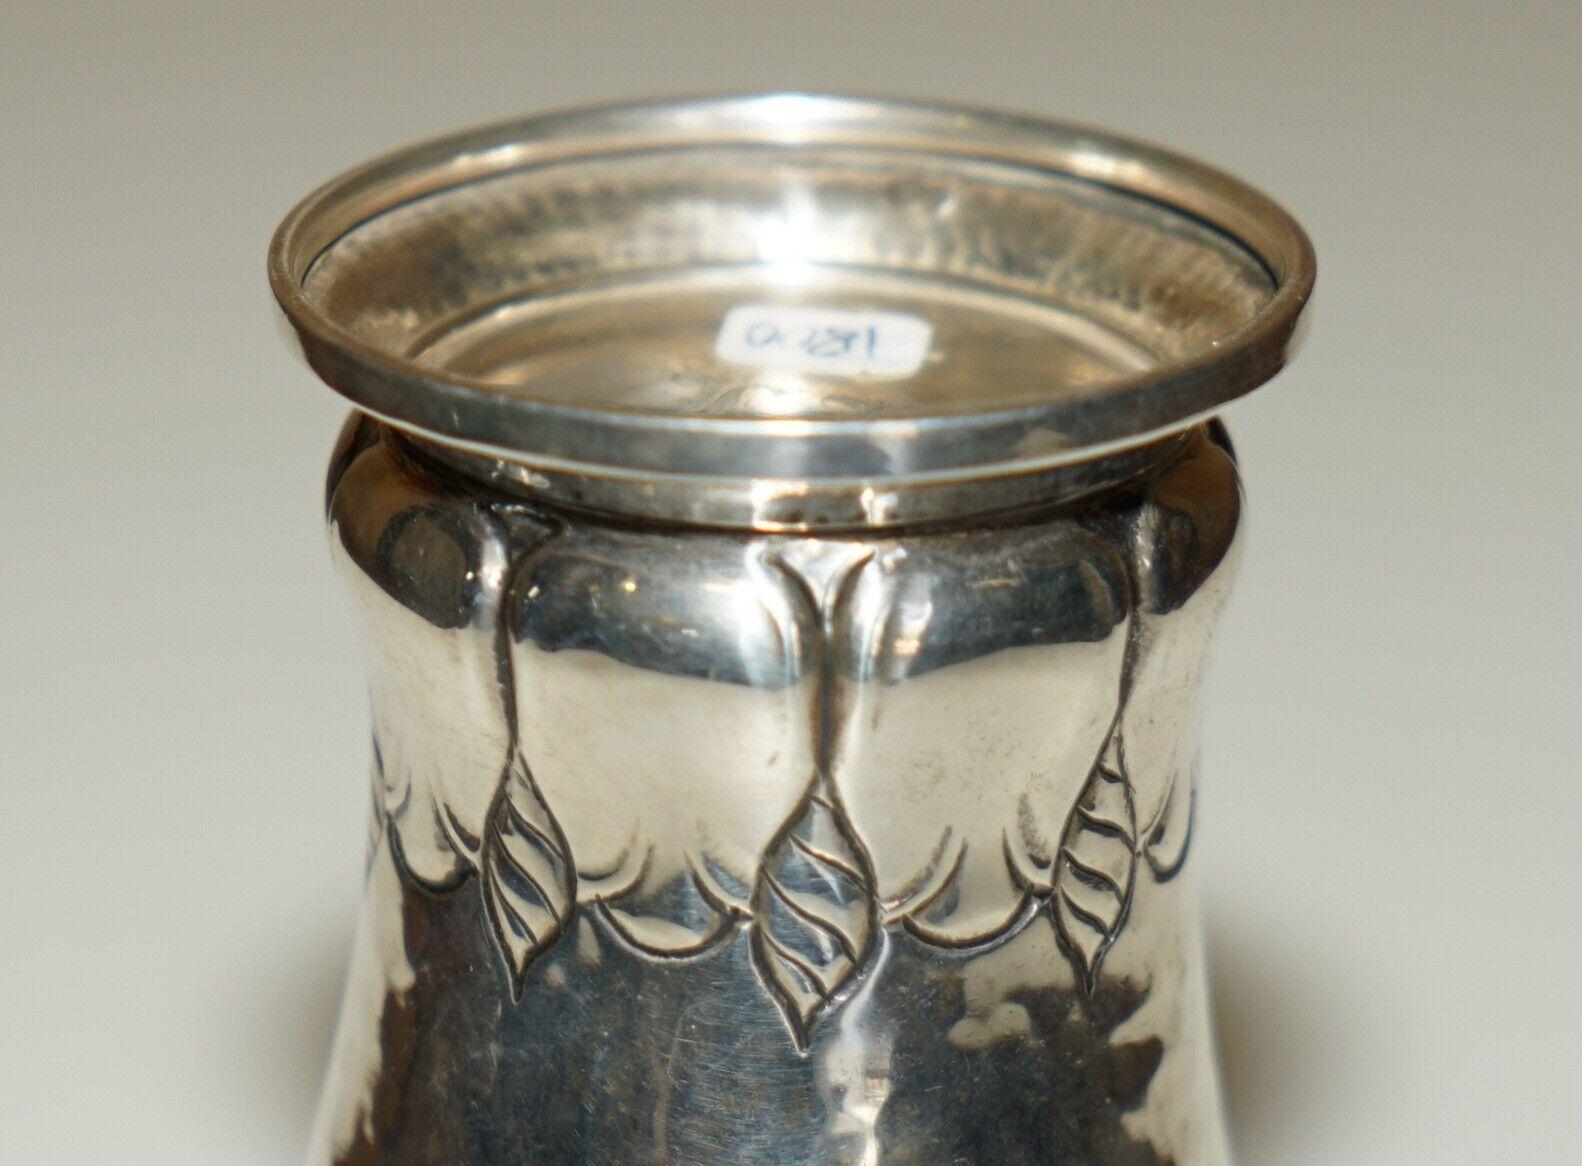 Hand-Crafted 1913-1927 DATED HAND HAMMERED STERLING SiLVER ART NOUVEAU LIBERTY'S STYLE VASE For Sale